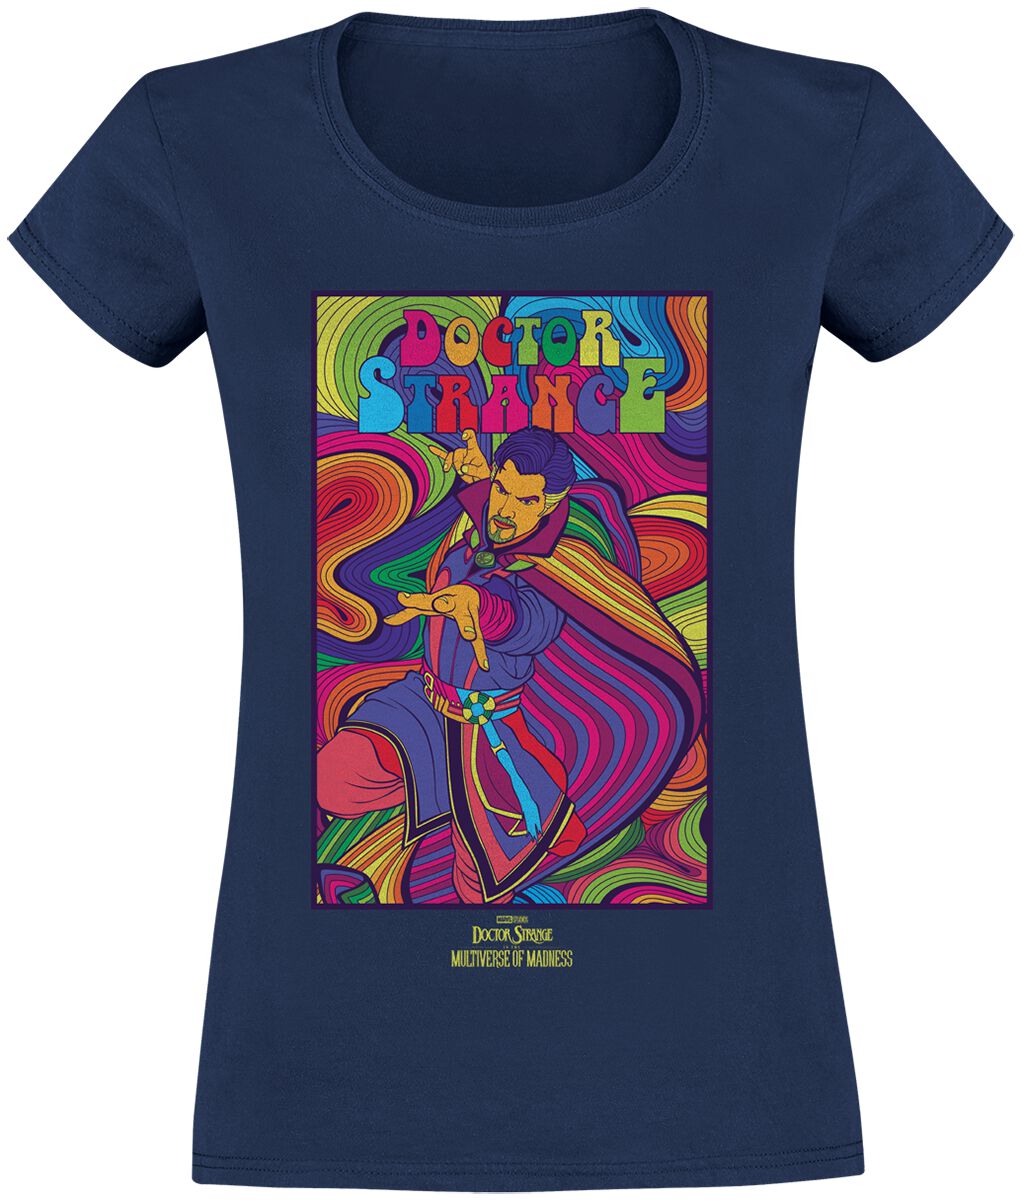 Doctor Strange In the Multiverse Of Madness - Colourful T-Shirt blue